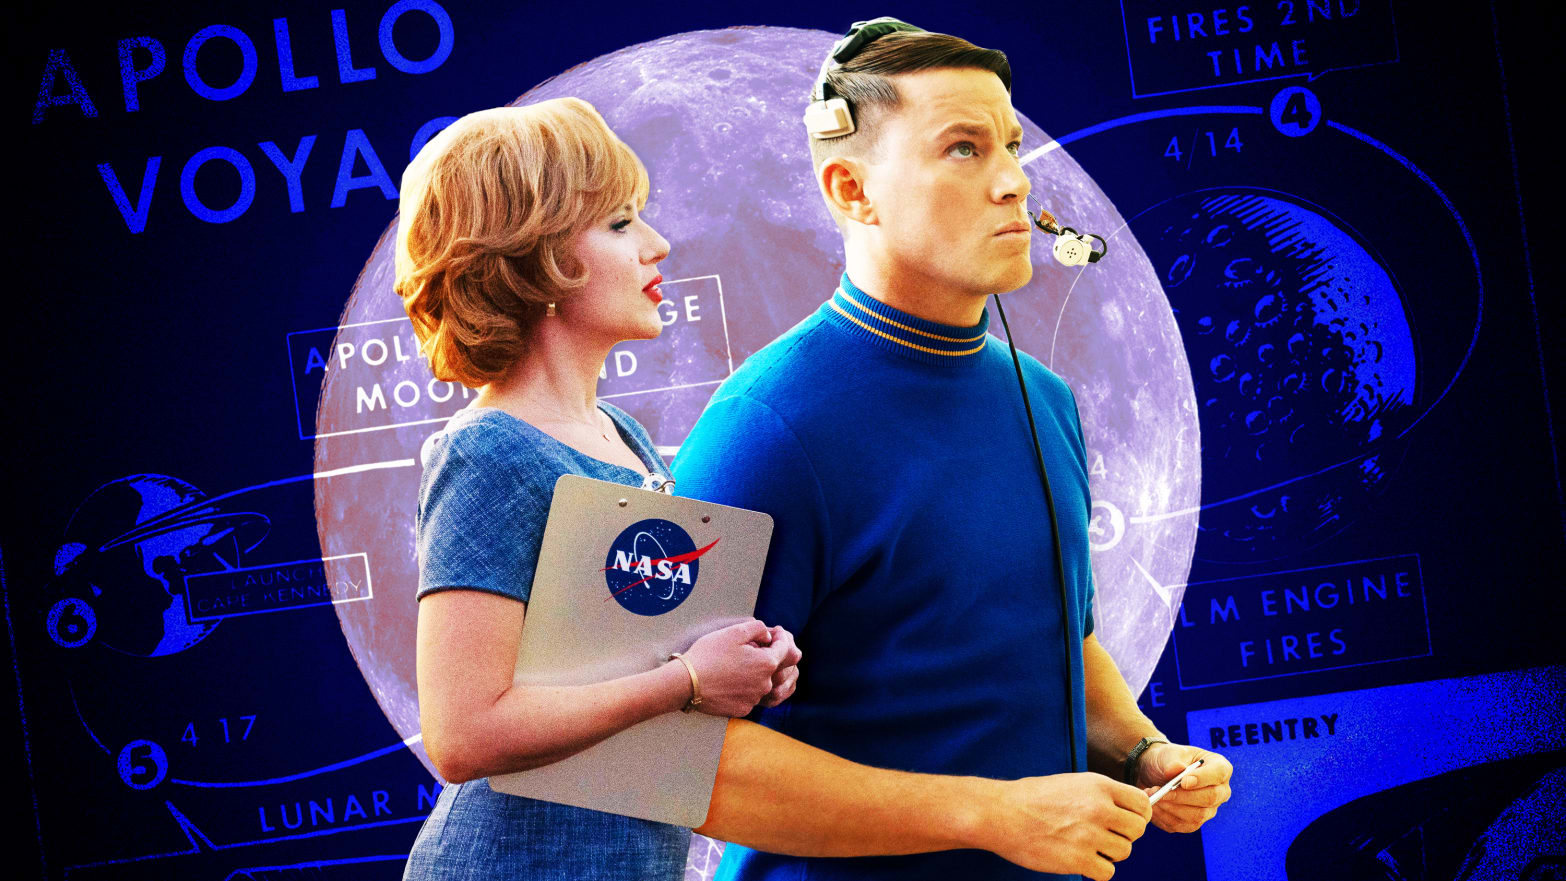 A photo illustration of Scarlett Johansson and Channing Tatum in “Fly Me to the Moon.”